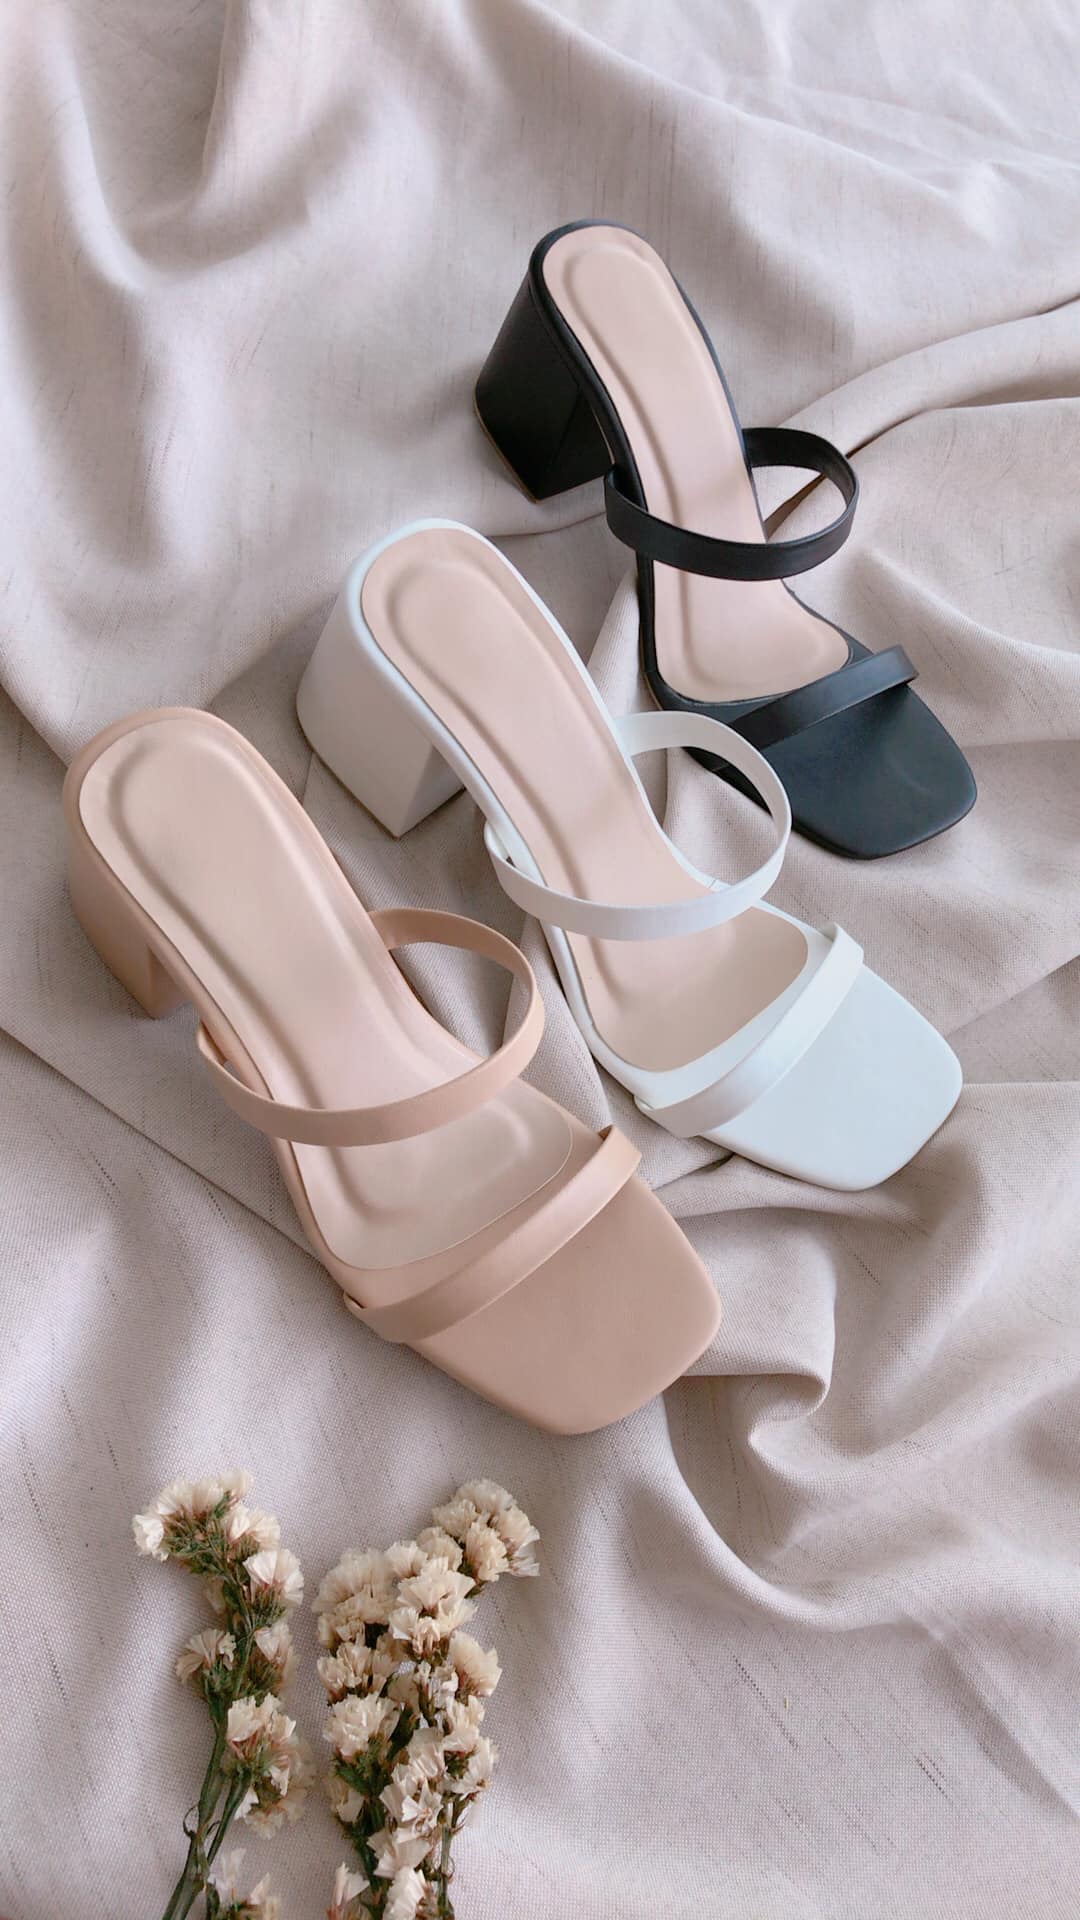 Women Casual Ankle Strap Sandals Mid Heel Peep Toe Buckle Summer Shoes Big  Size | eBay